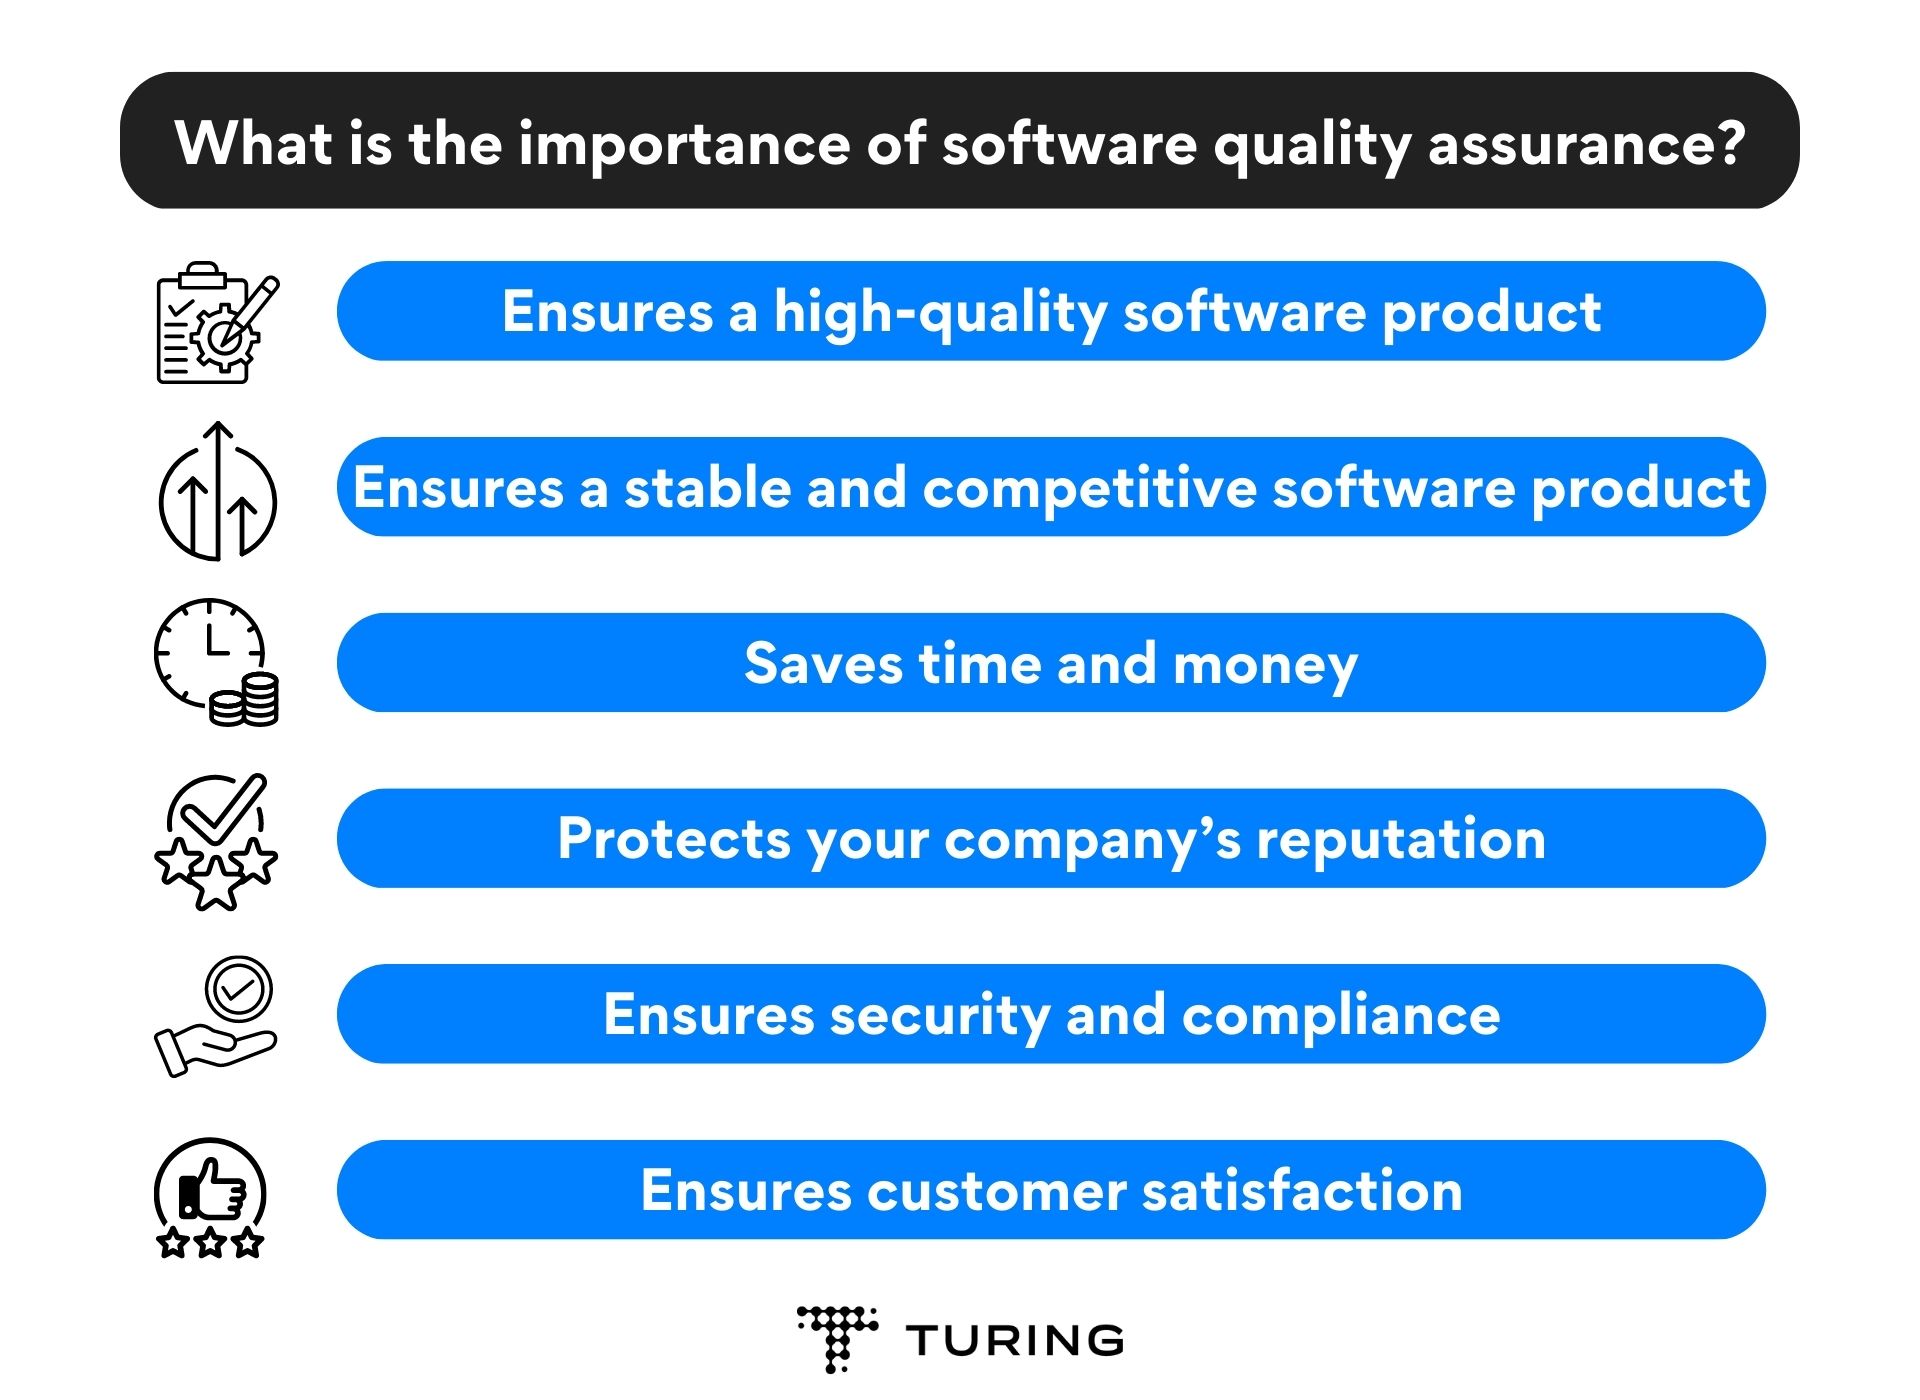 Why is Software Quality Assurance important